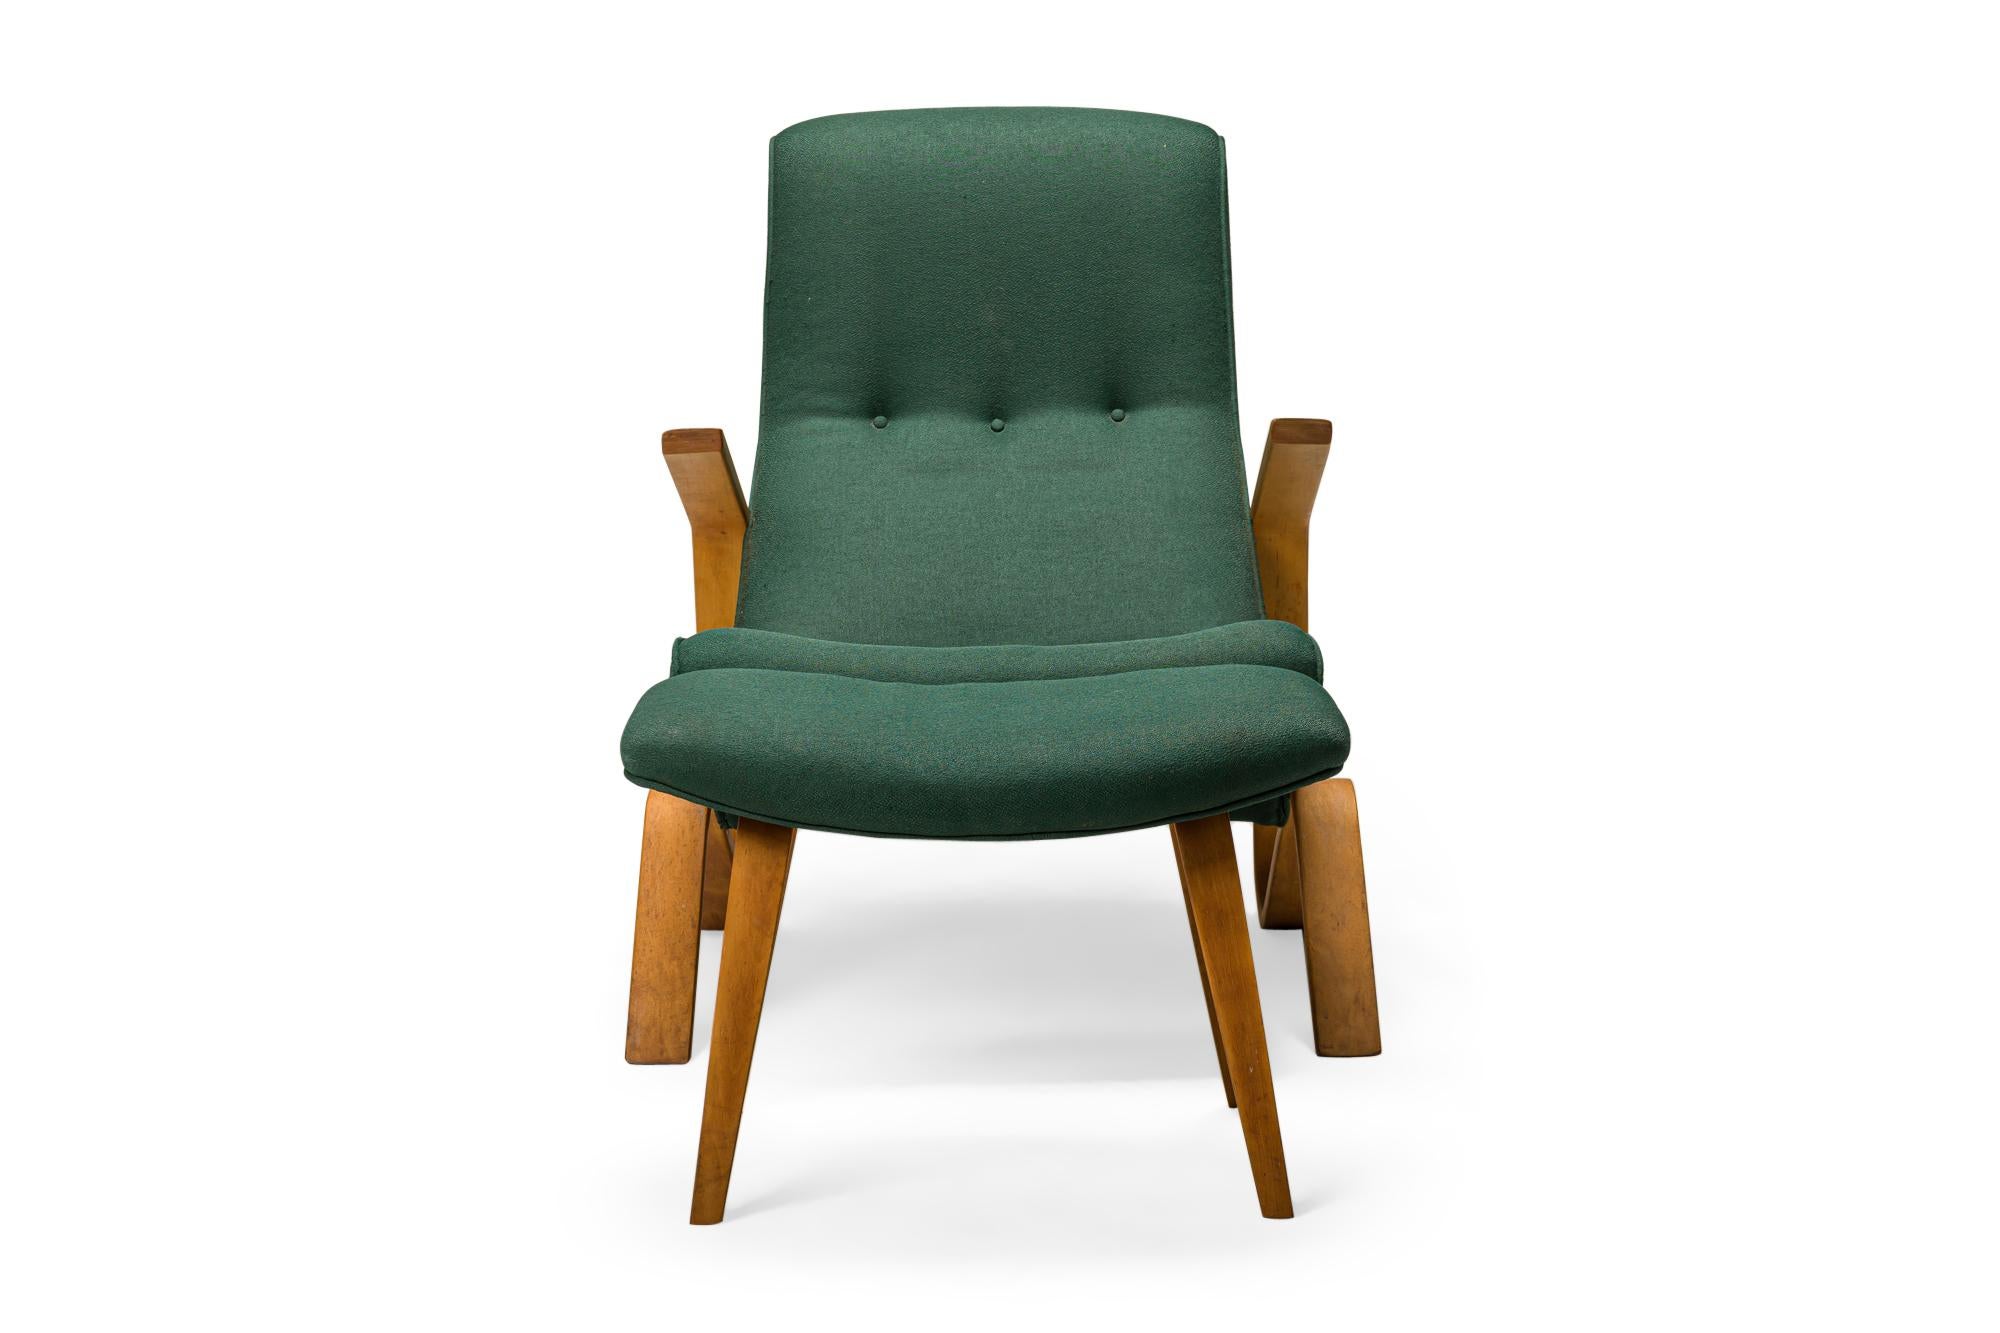 Mid-Century 'Grasshopper' armchair and matching footstool with dark green button tufted fabric upholstery and curved birch wood frames and legs. (EERO SAARINEN FOR KNOLL)(PRICED AS SET)
